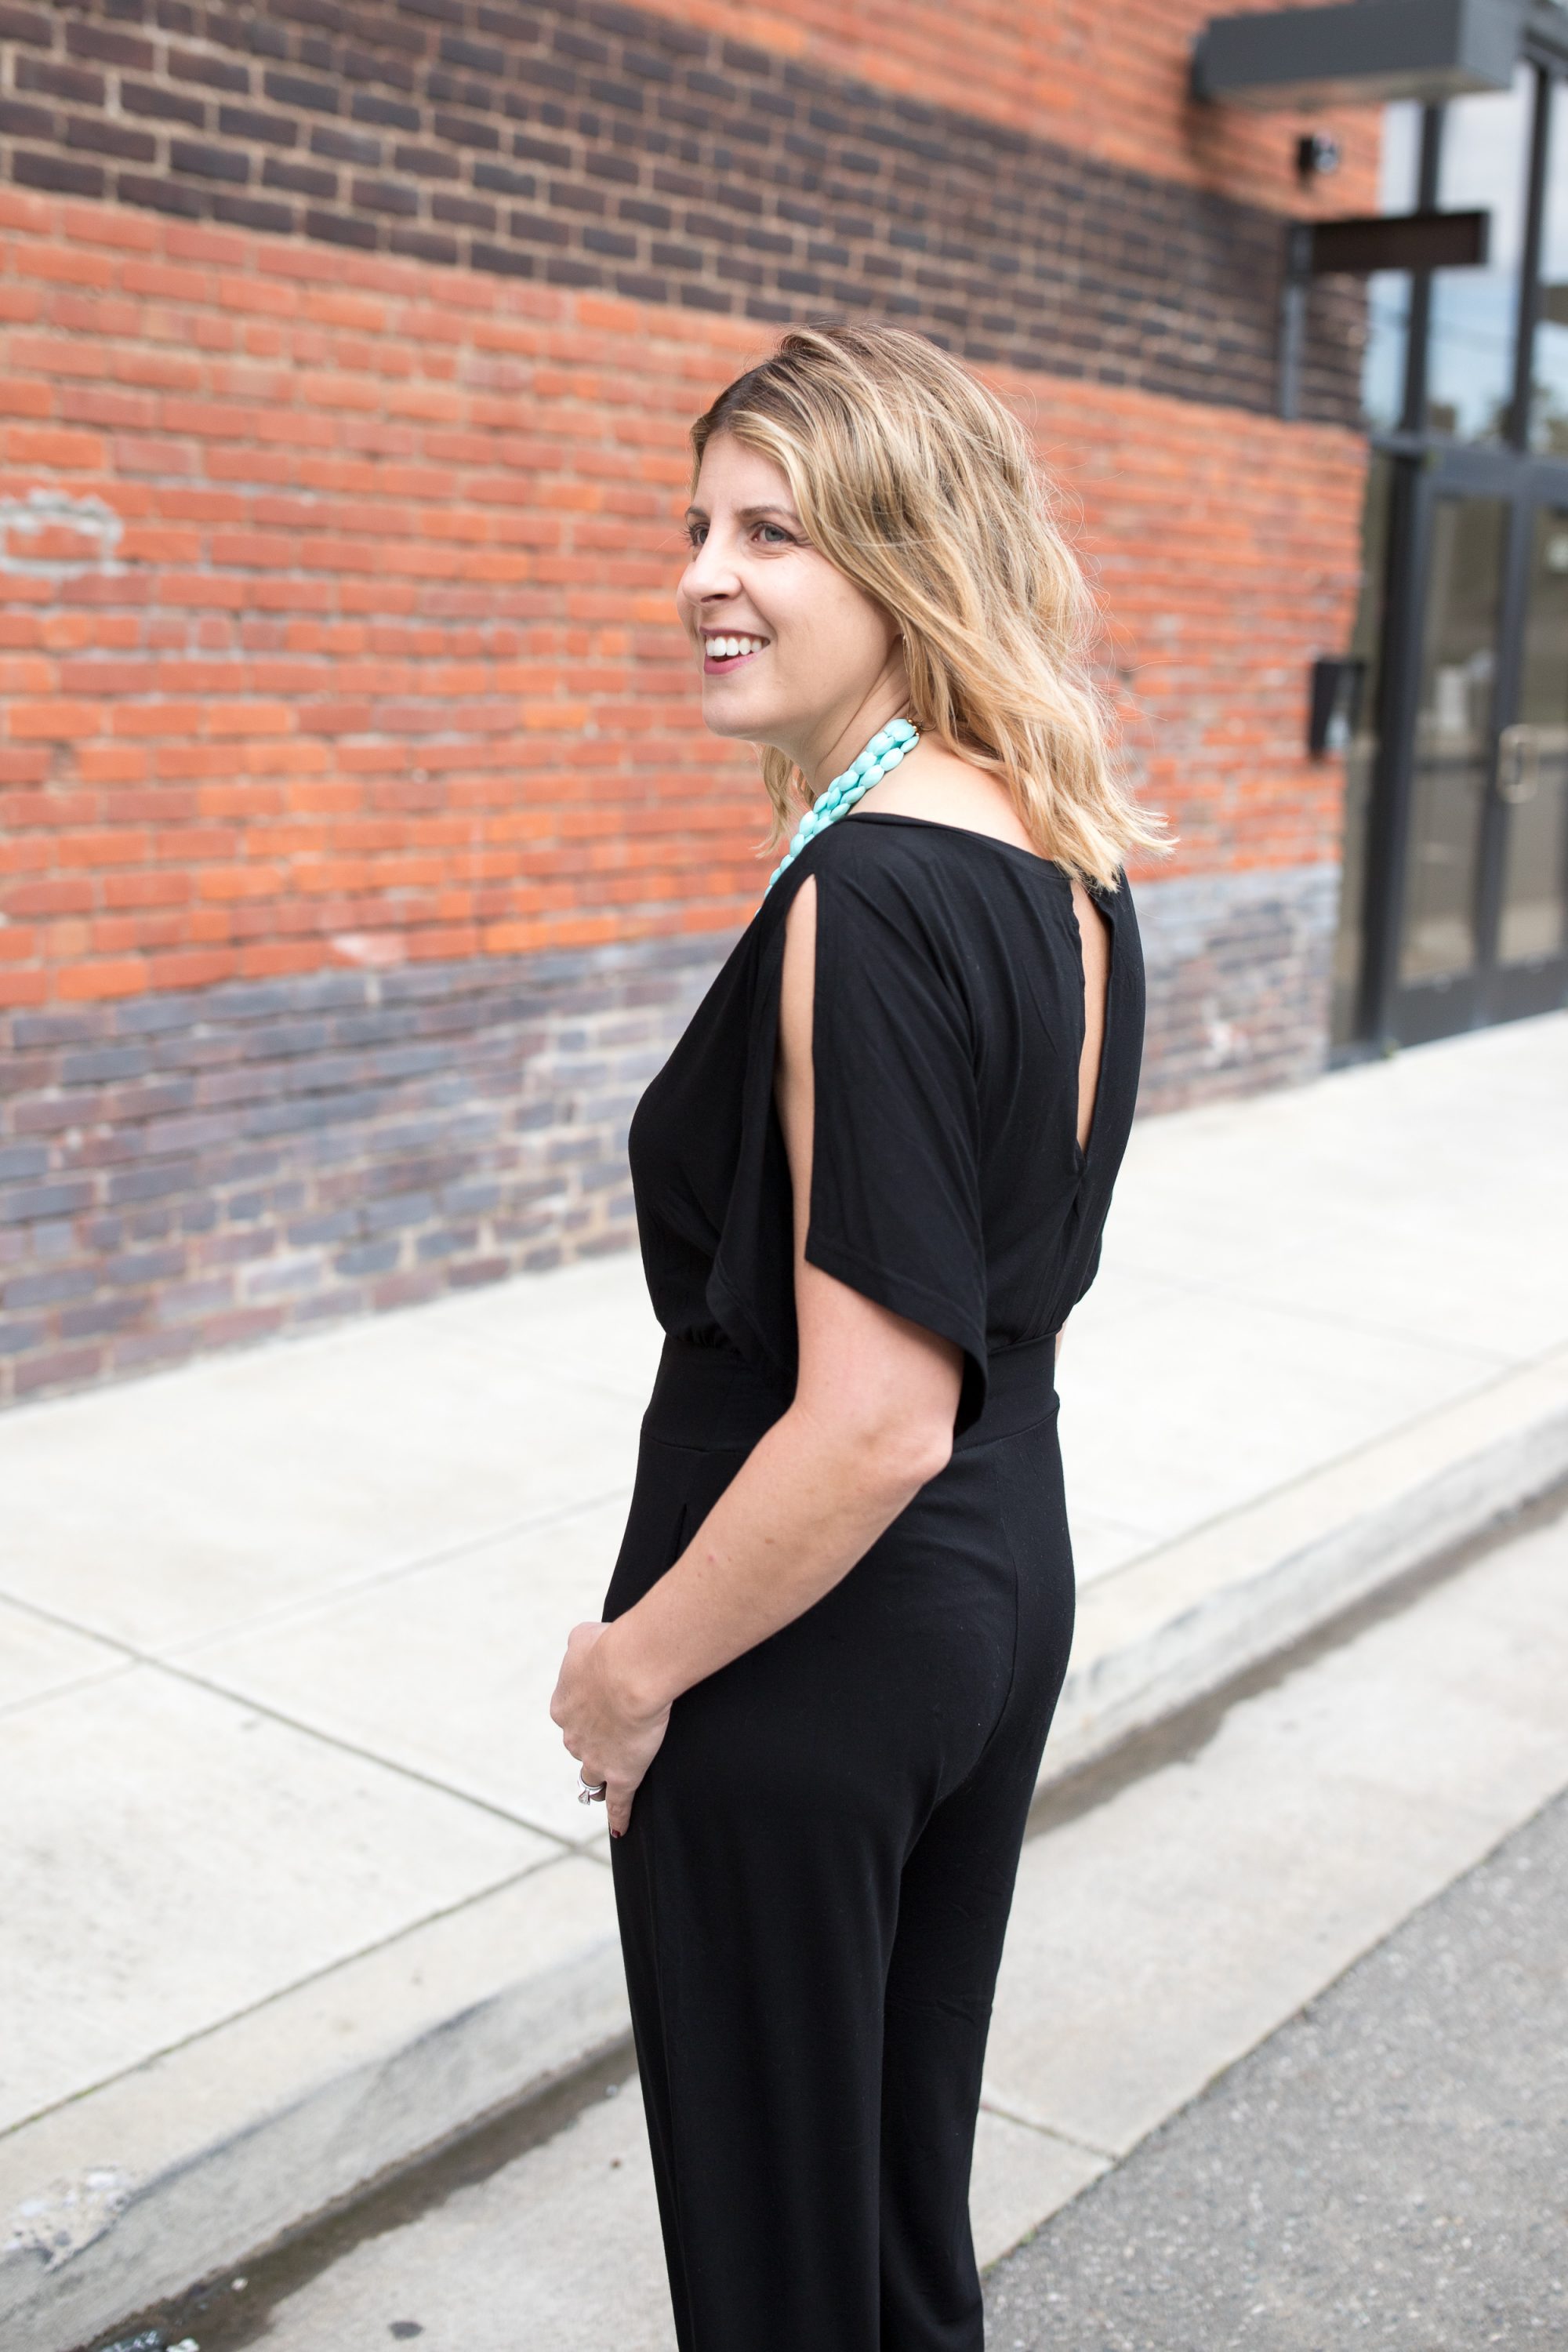 styling a jumpsuit for any season